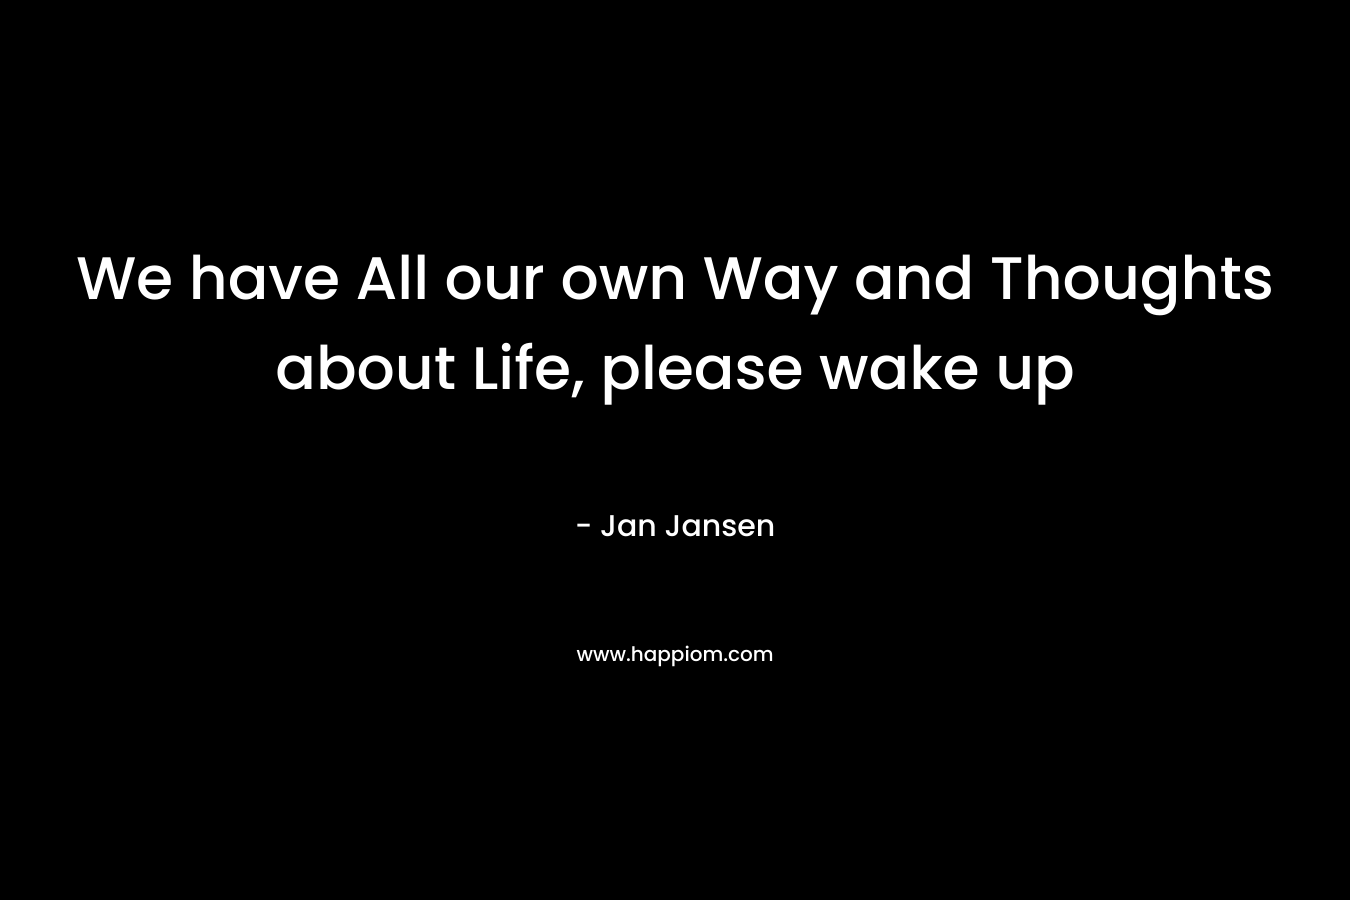 We have All our own Way and Thoughts about Life, please wake up – Jan Jansen